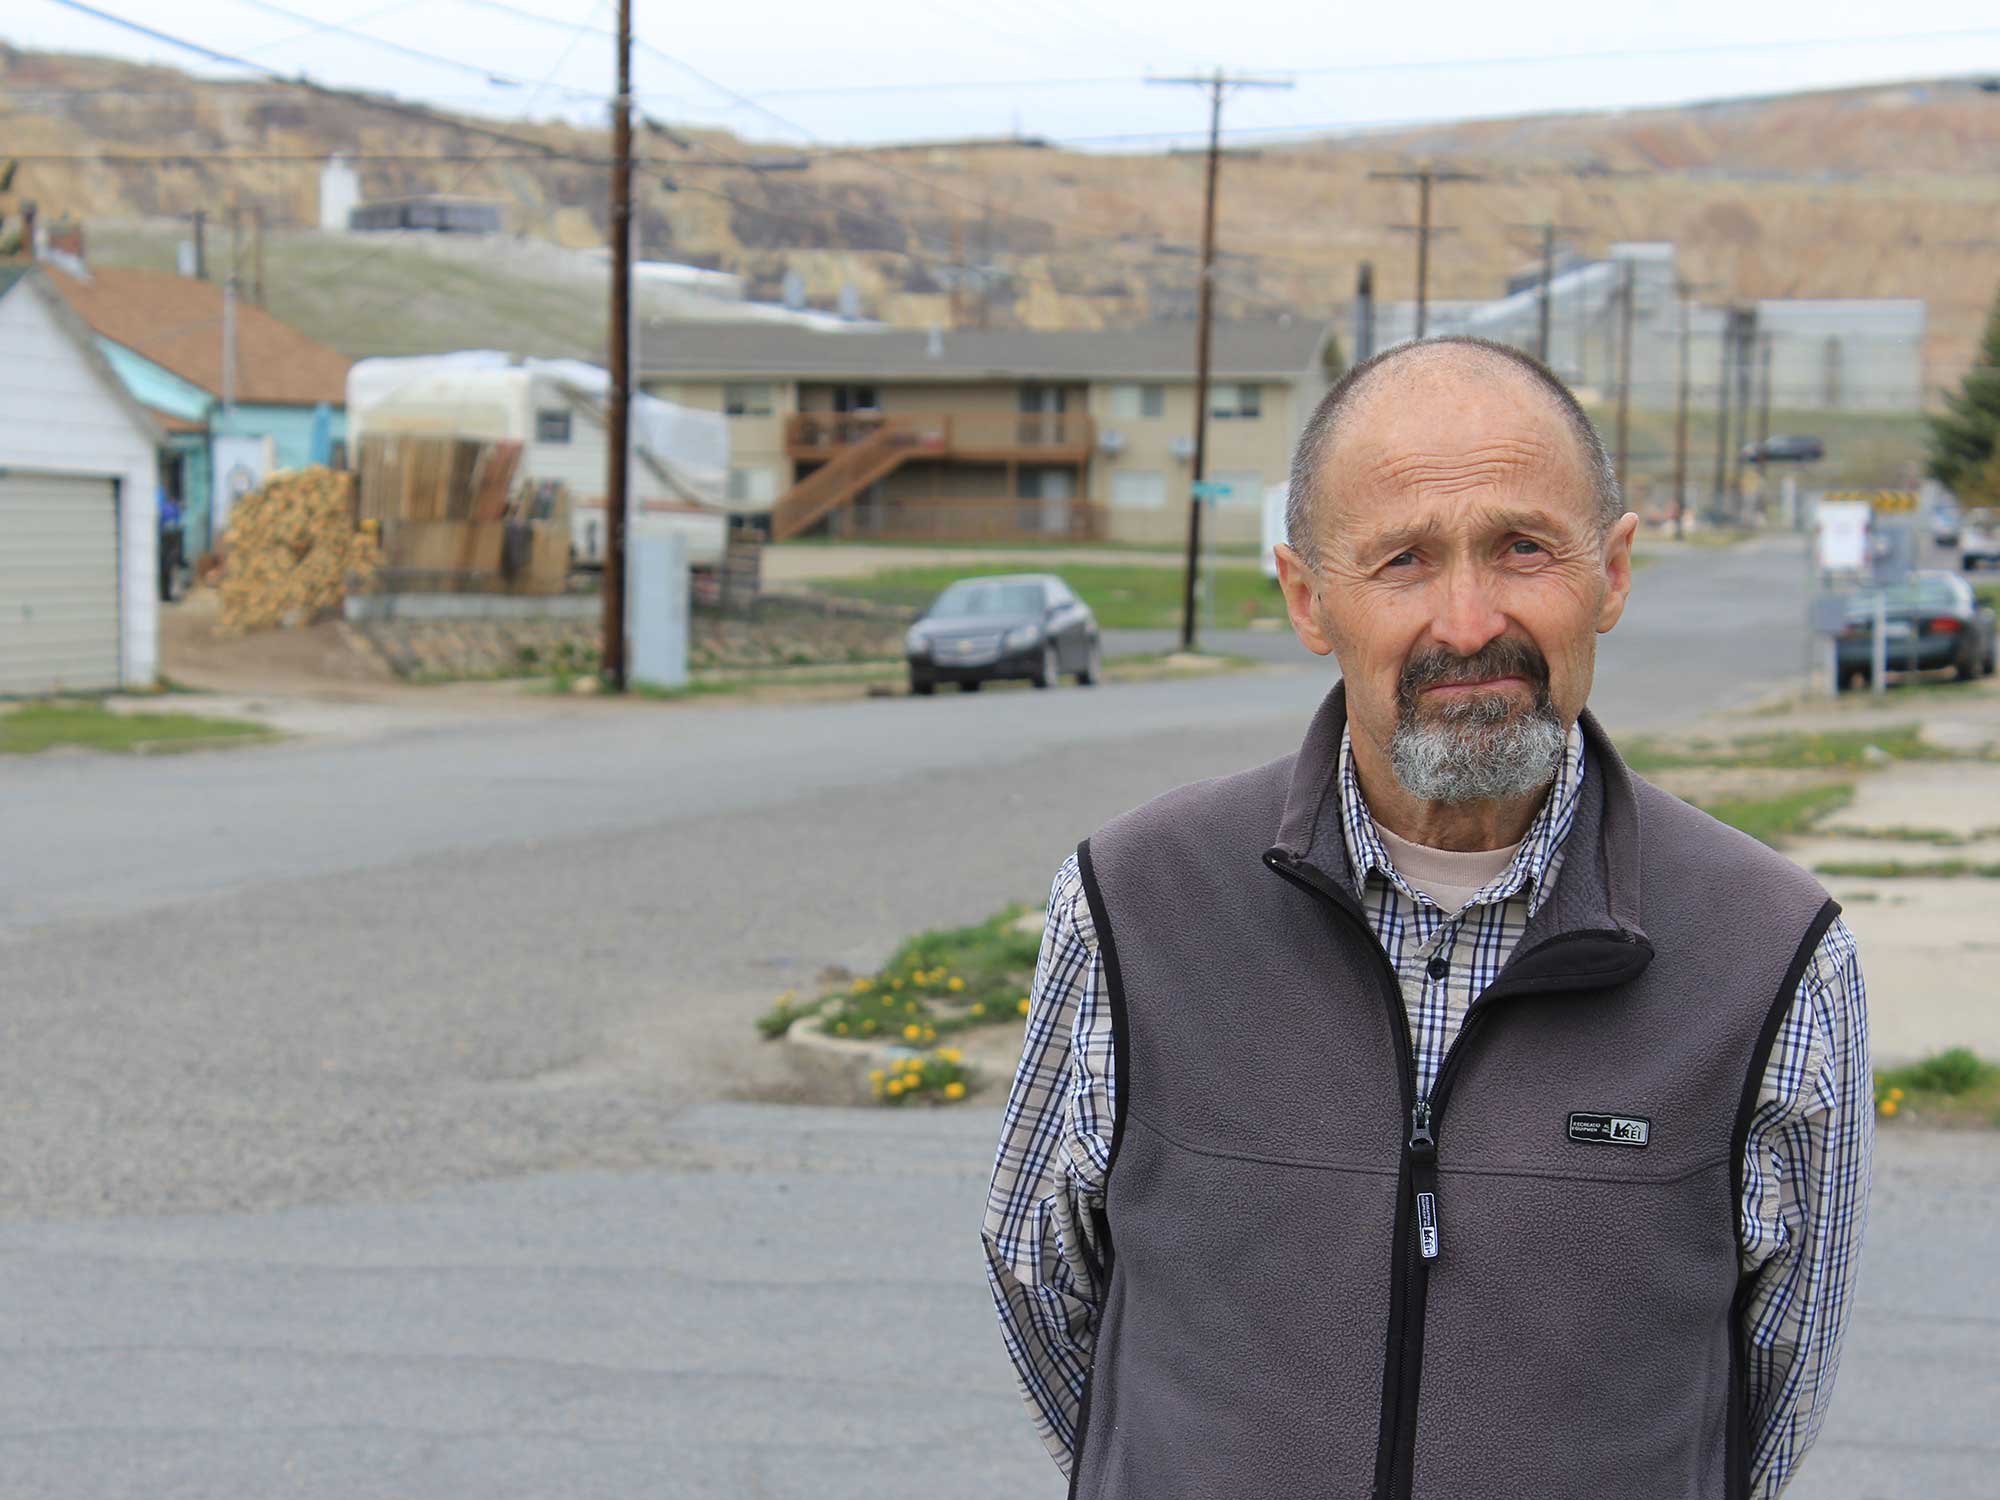 A Butte, Montana resident worried about his town.